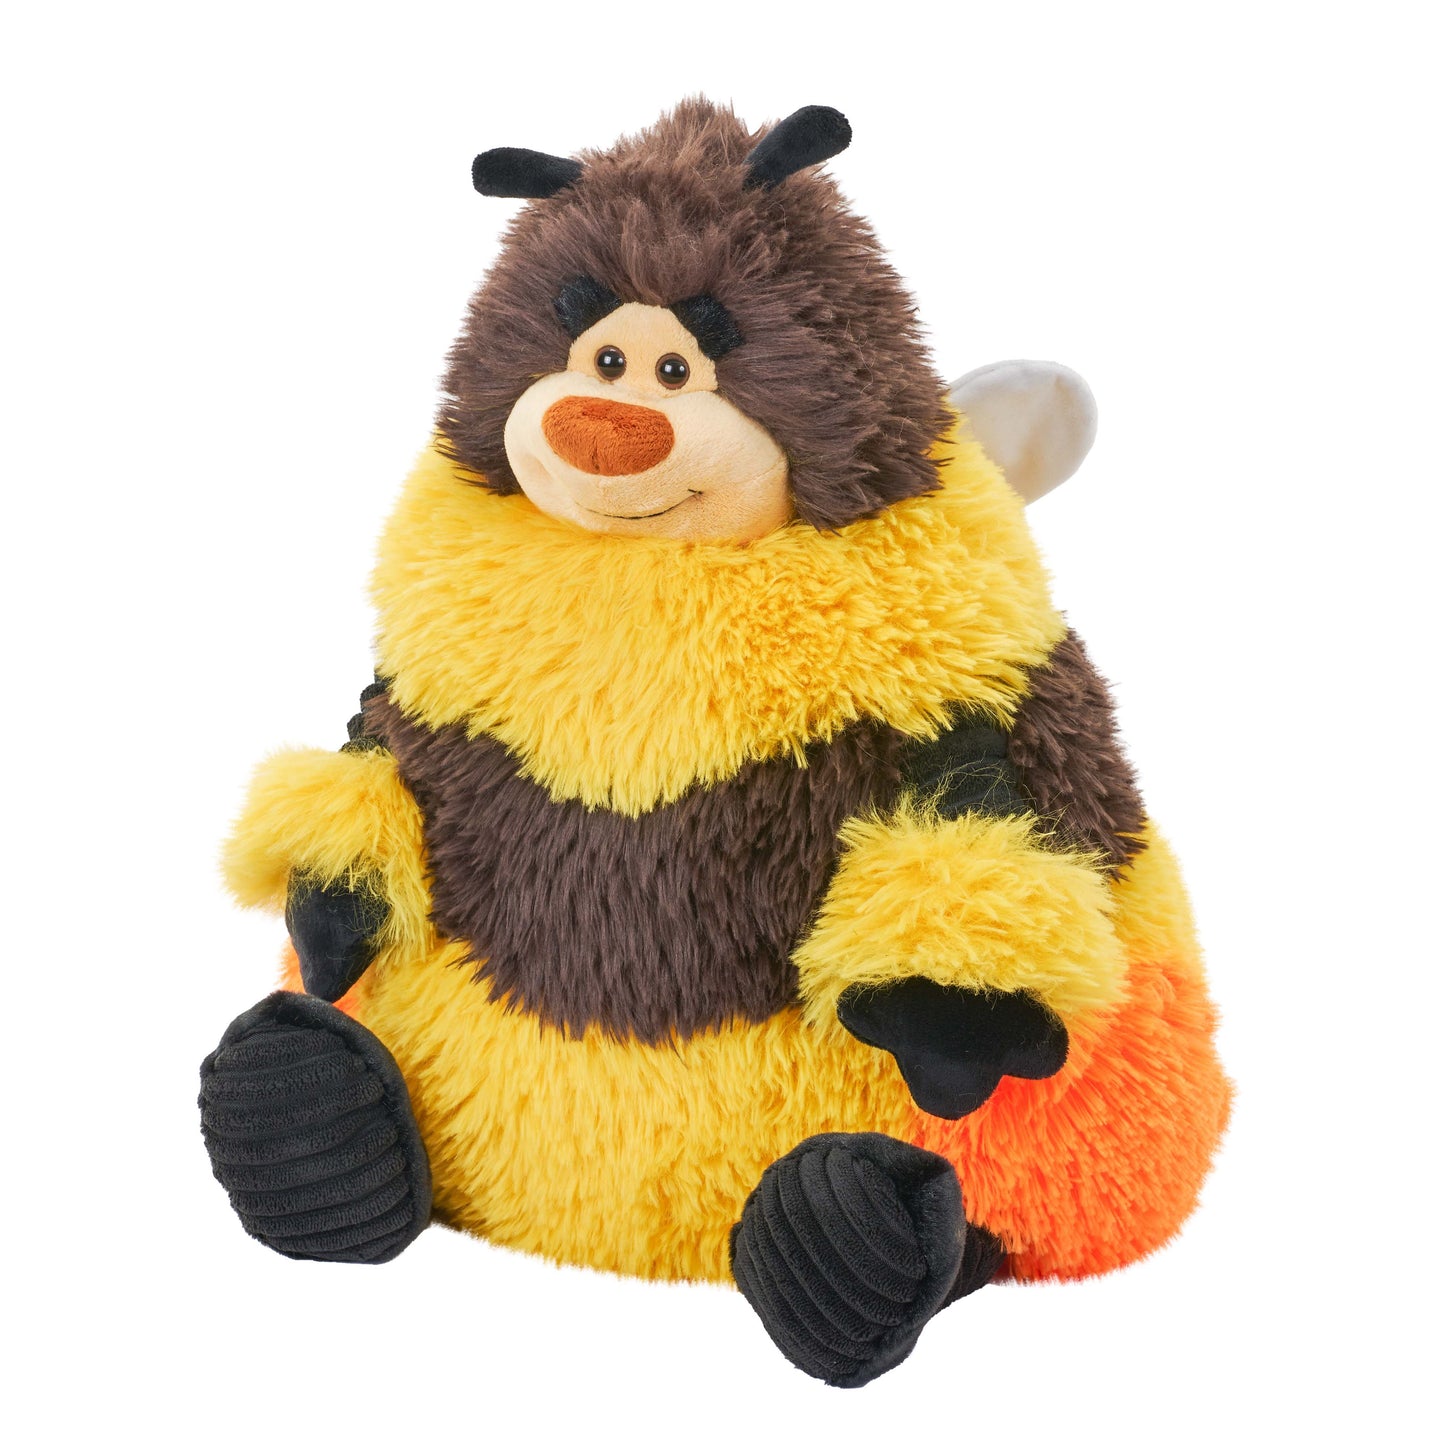 Snuggleluvs Weighted Plush Bee